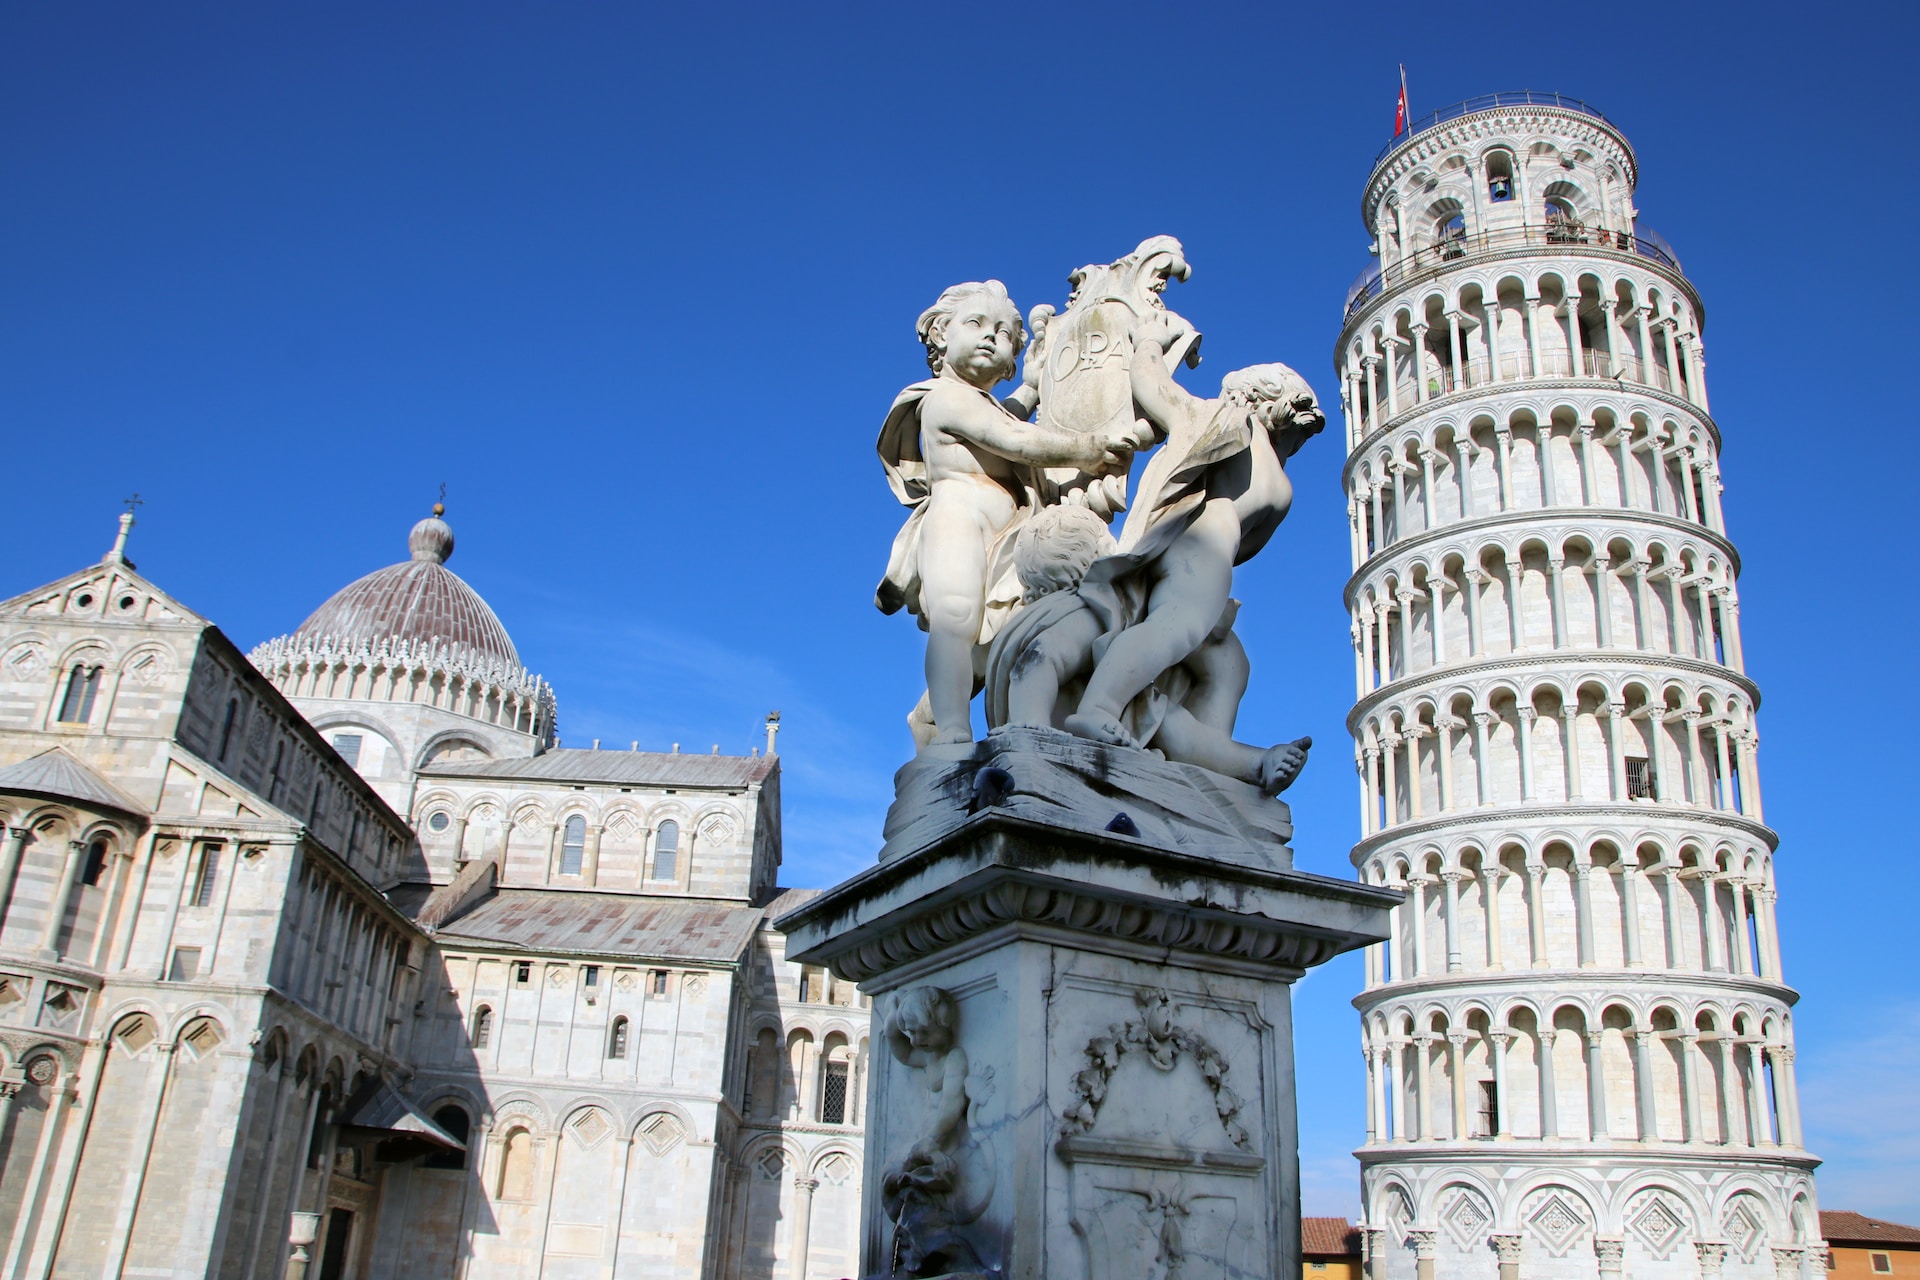 The Leaning Tower of Pisa - travel guide